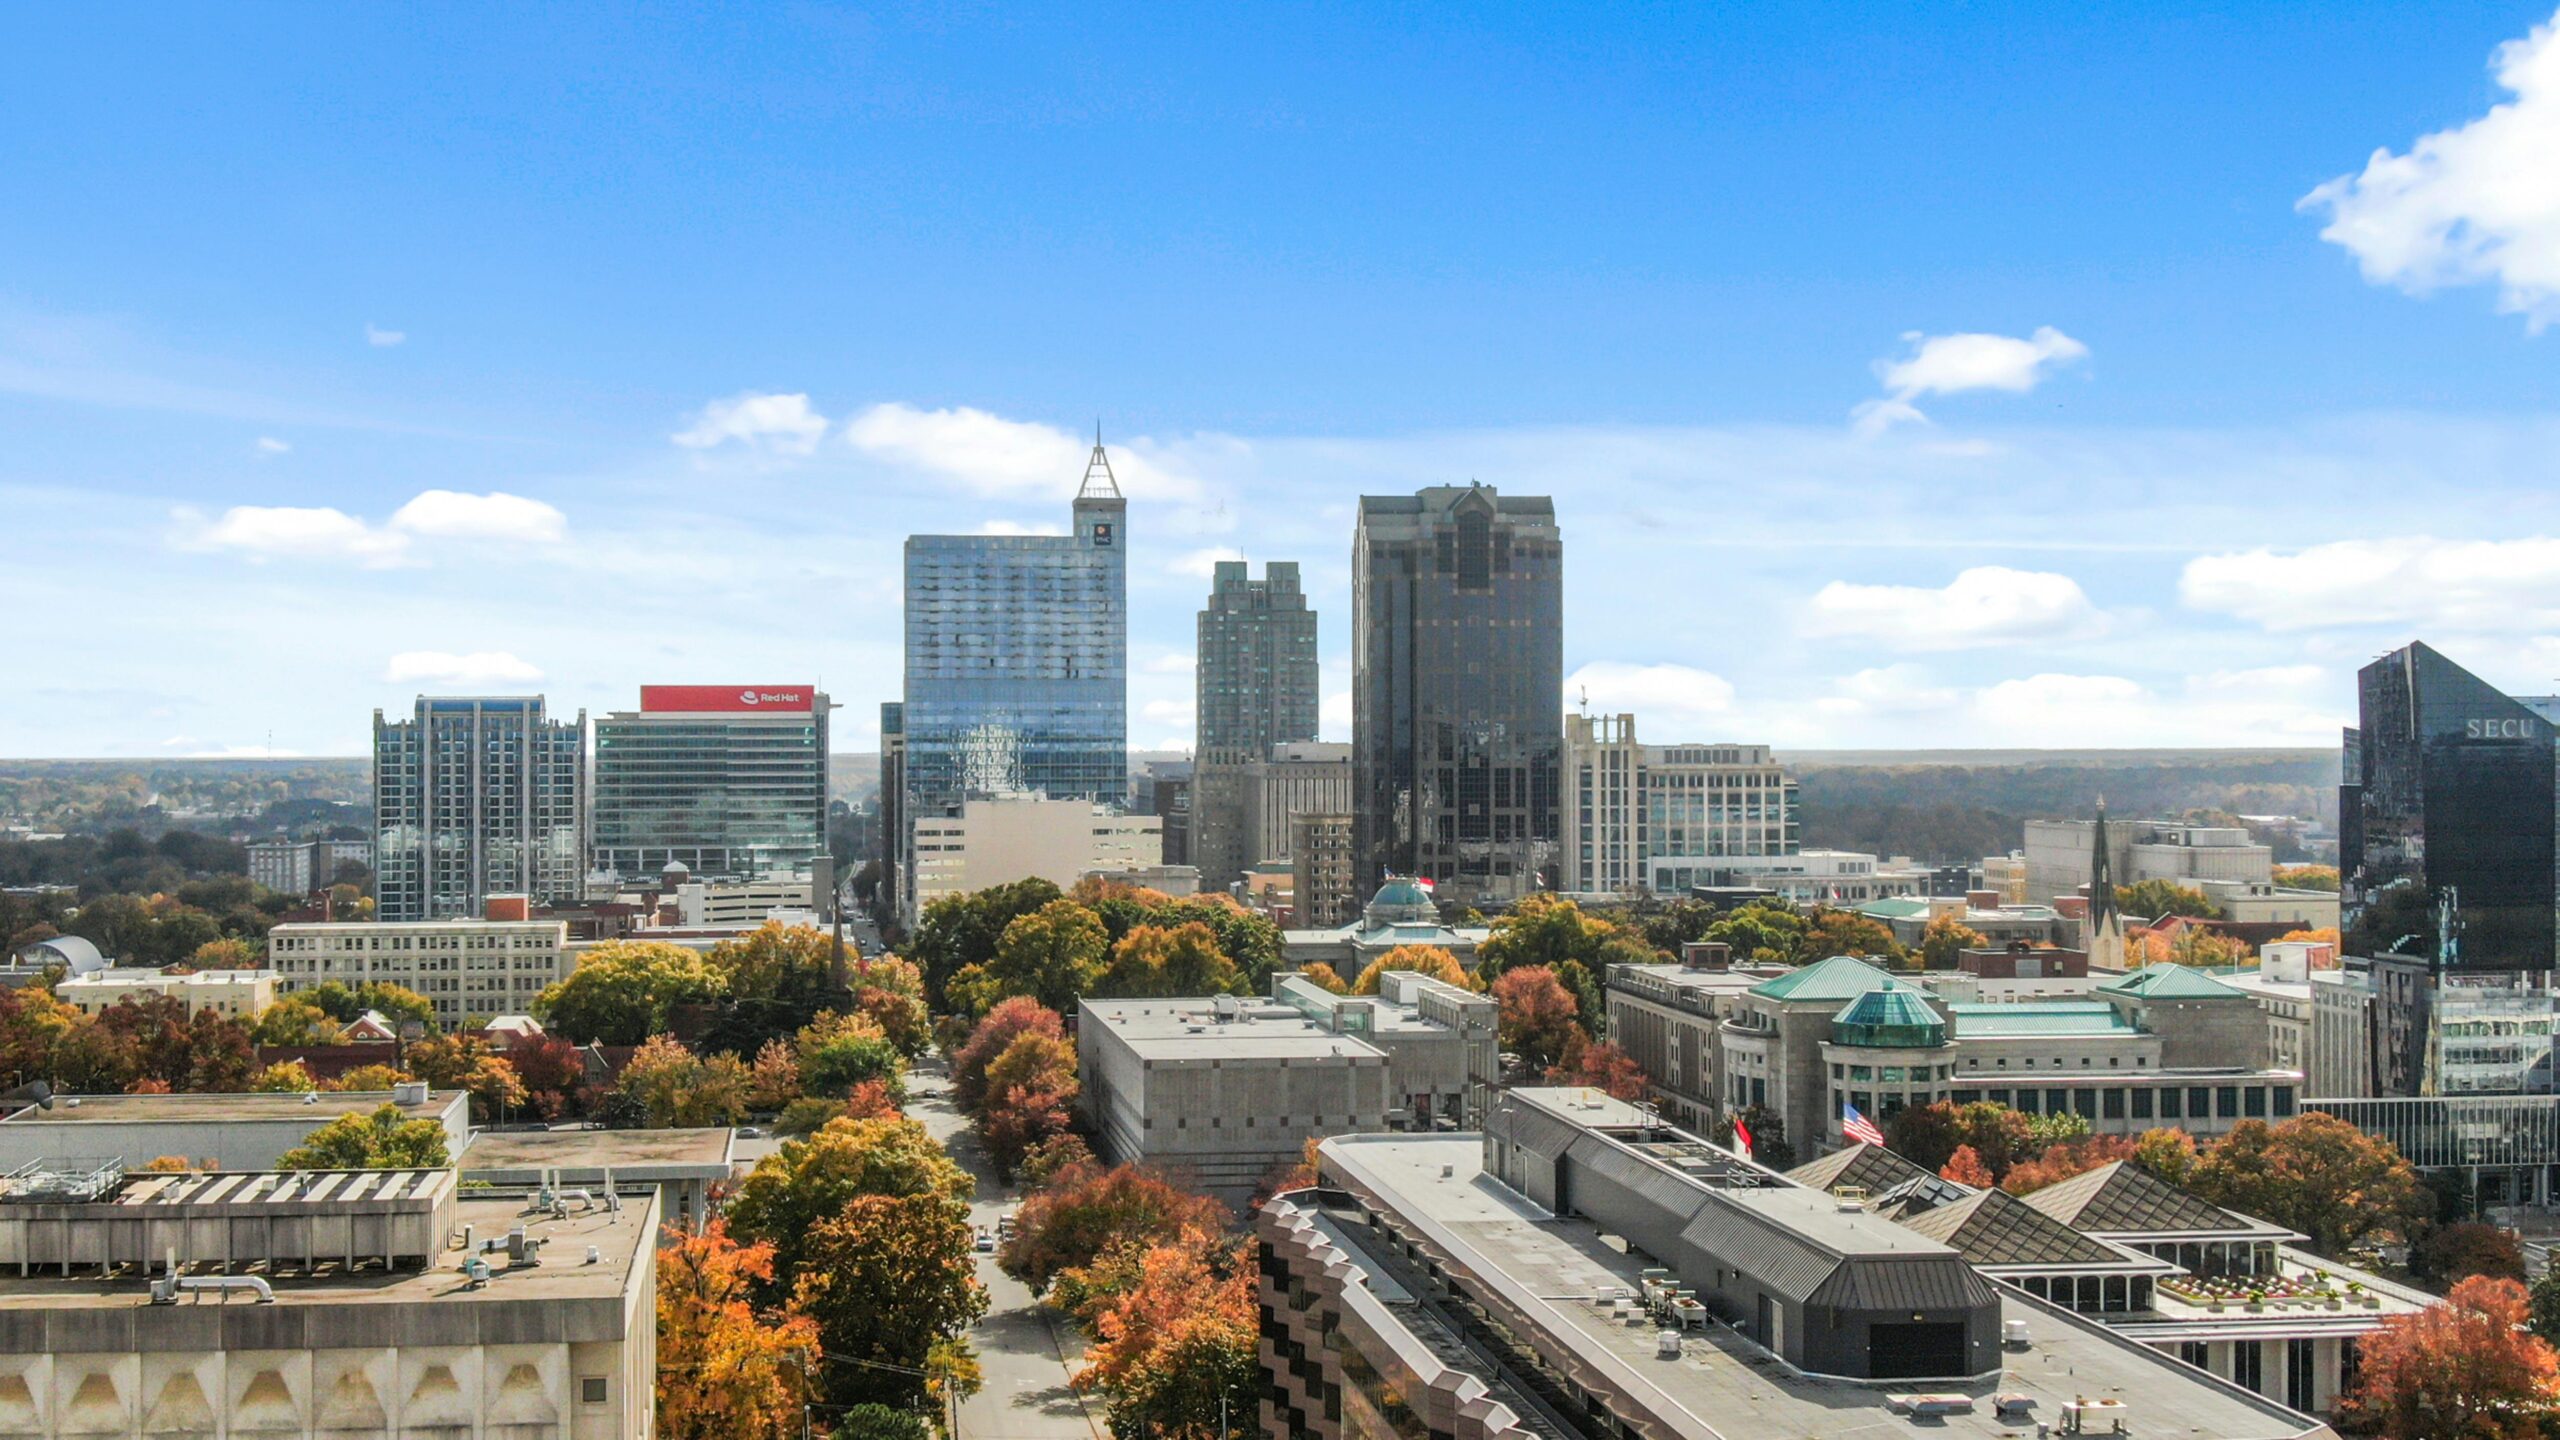 Home to incredible universities and a high Black homeownership percentage, Raleigh is a great place for Black families. Pictured: Raleigh, North Carolina.